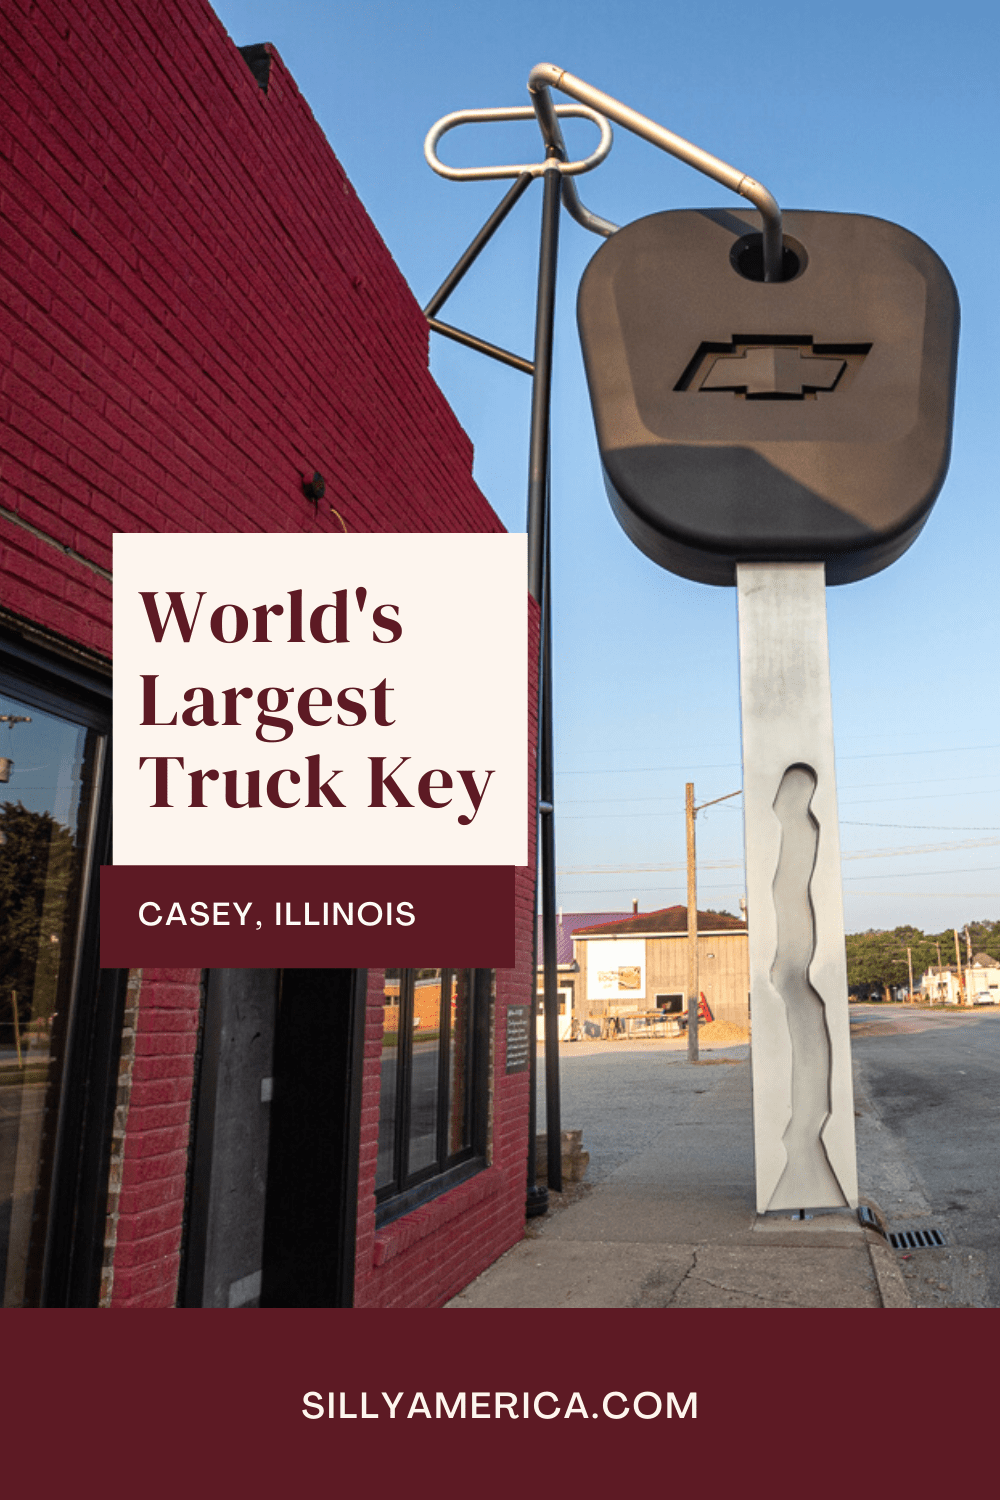 Casey, Illinois was already home to 6 world’s largest roadside attractions when they invited Guinness World Records to certify the world’s largest key. This giant truck key is a must see roadside attraction.  #IllinoisRoadsideAttractions #IllinoisRoadsideAttraction #RoadsideAttractions #RoadsideAttraction #RoadTrip #IllinoisRoadTrip #IllinoisWeekendGetaways #IllinoisWithKids #IllinoisRoadTripTravel